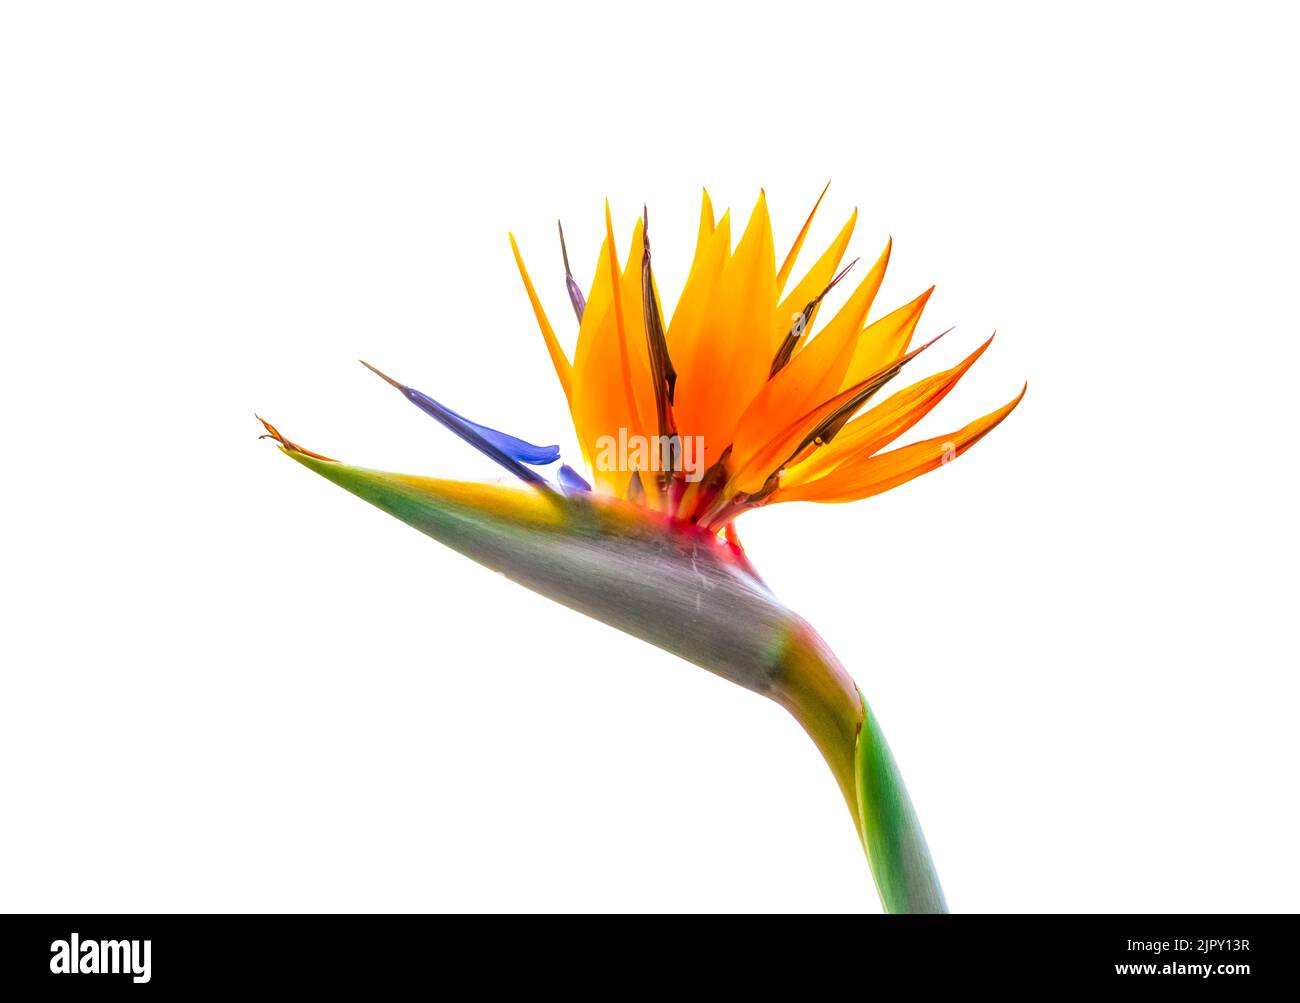 Brightly colored bird of paradise flower backlit closeup cutout isolated on white background Stock Photo